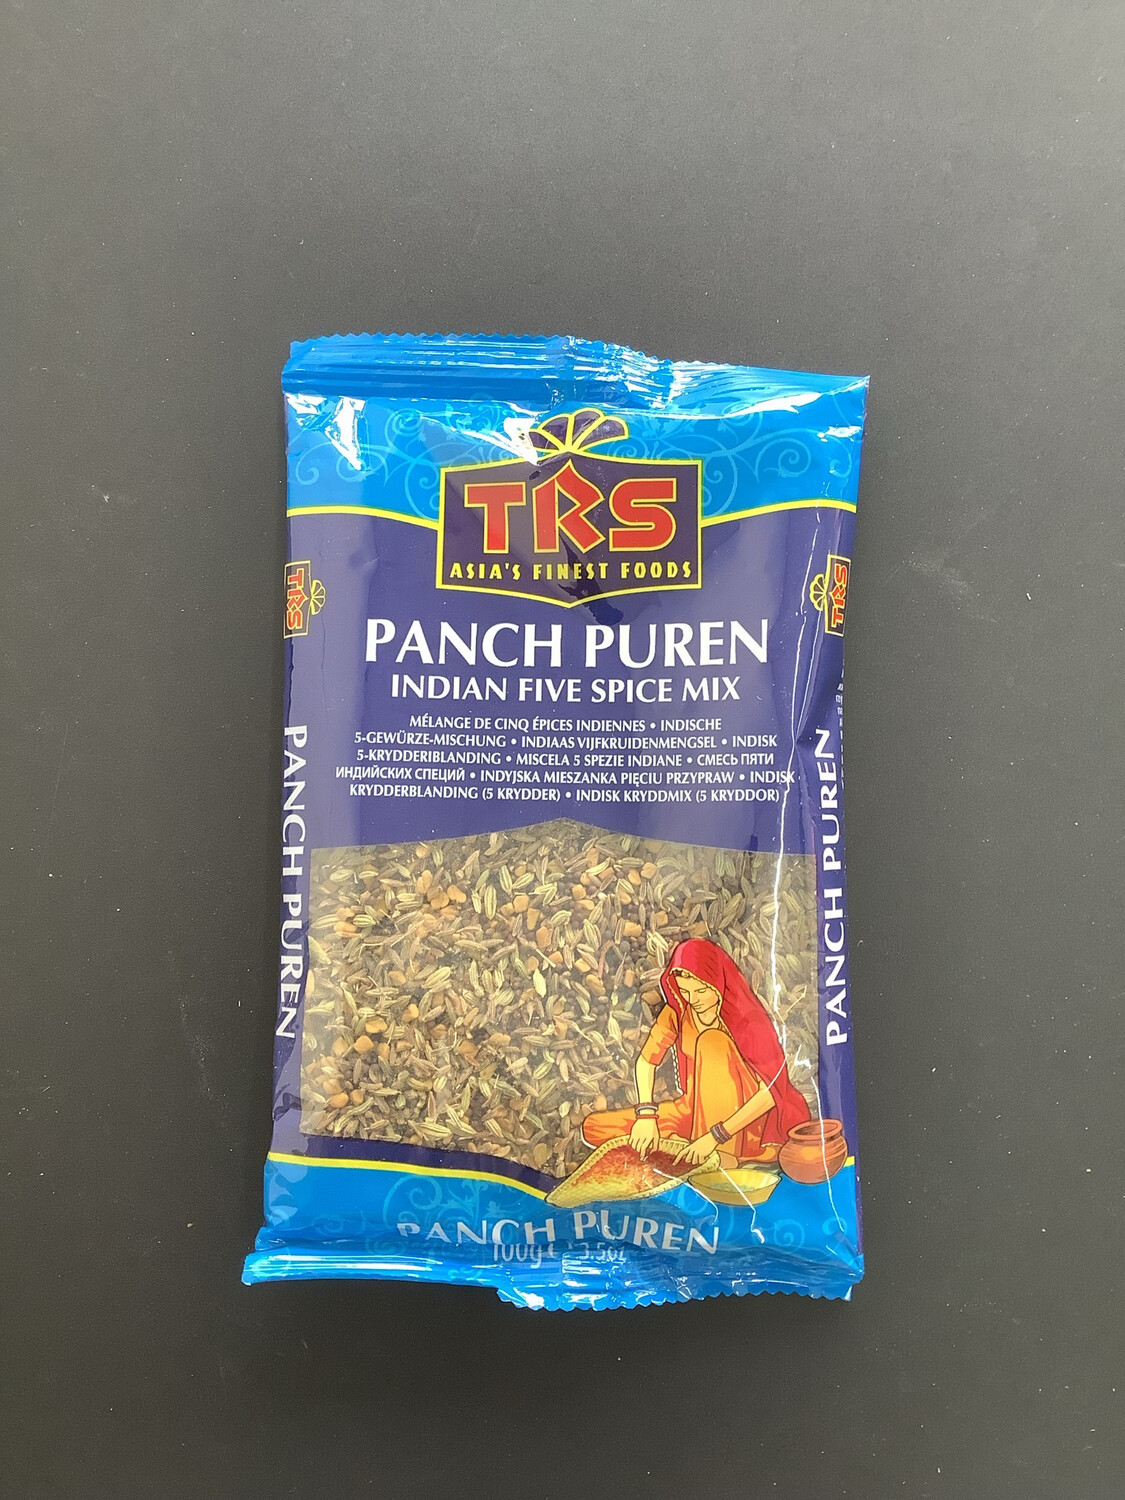 TRS Panch Puren Indian Five Spice Mix 100g